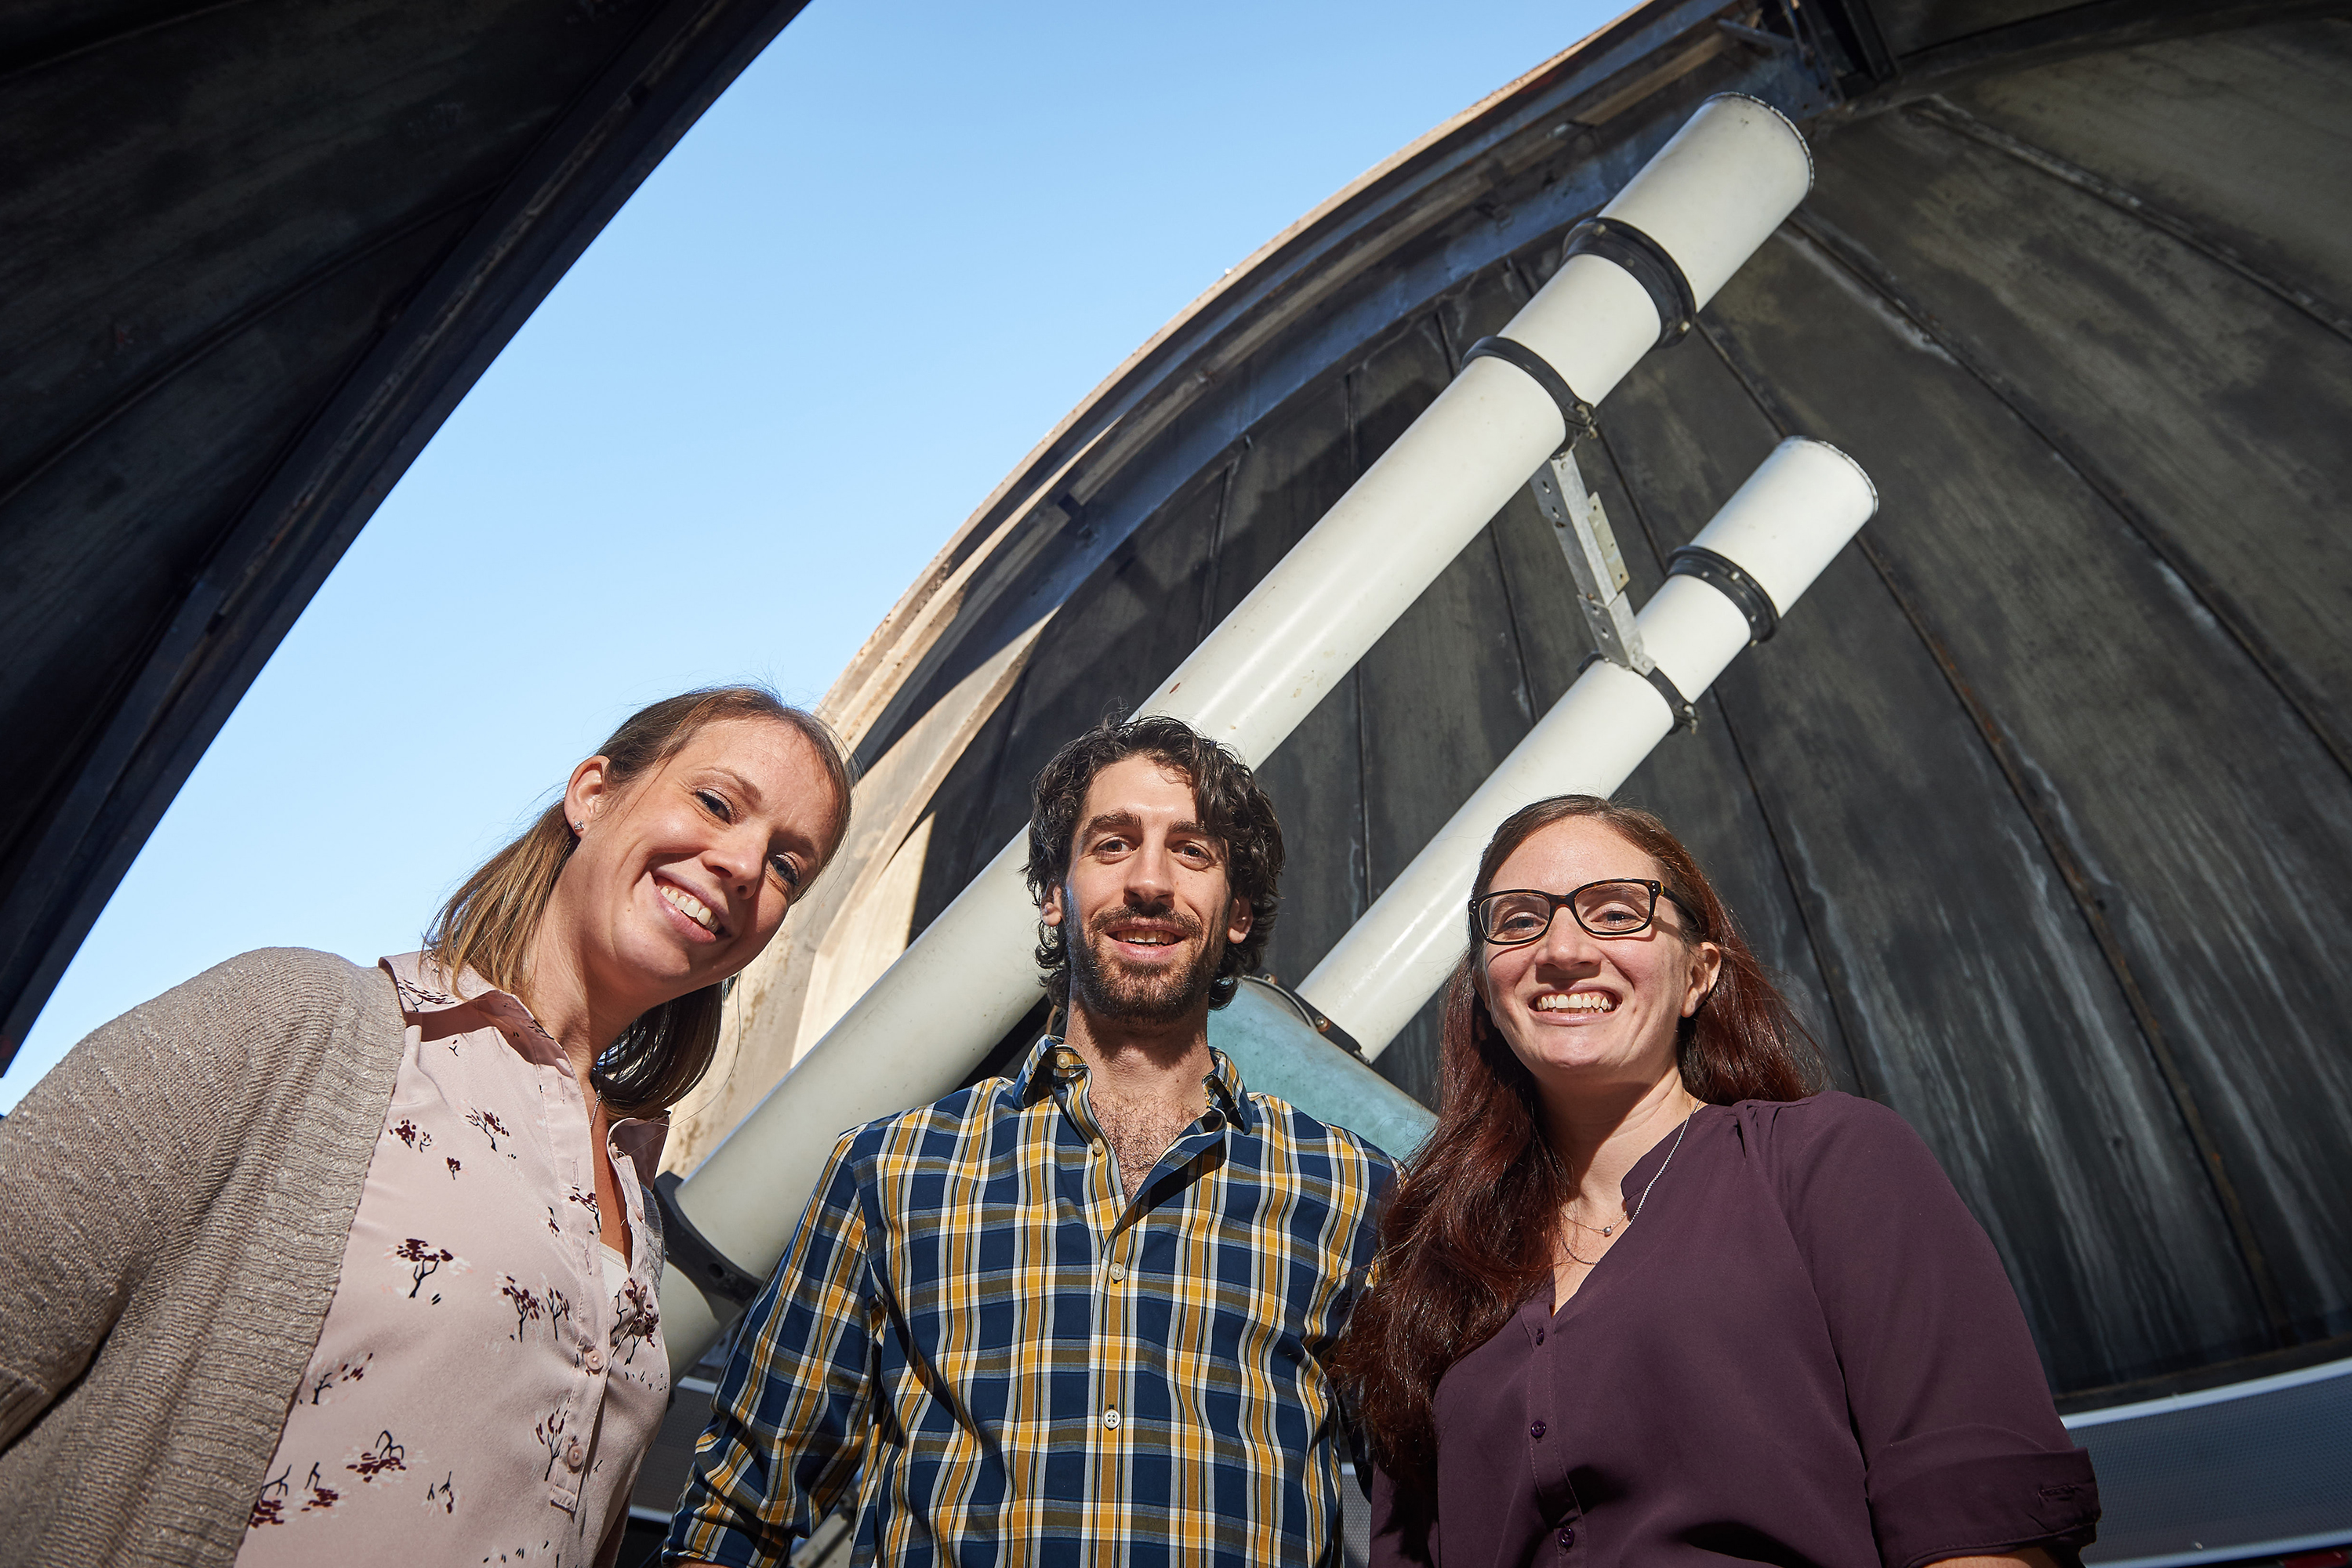 New assistant professors of physics Kate Whitaker, left, Jonathan Trump, and Cara Battersby are building UConn’s first world-class program in astrophysics. They are pictured here at the UConn Physics Observatory. (Peter Morenus/UConn Photo)